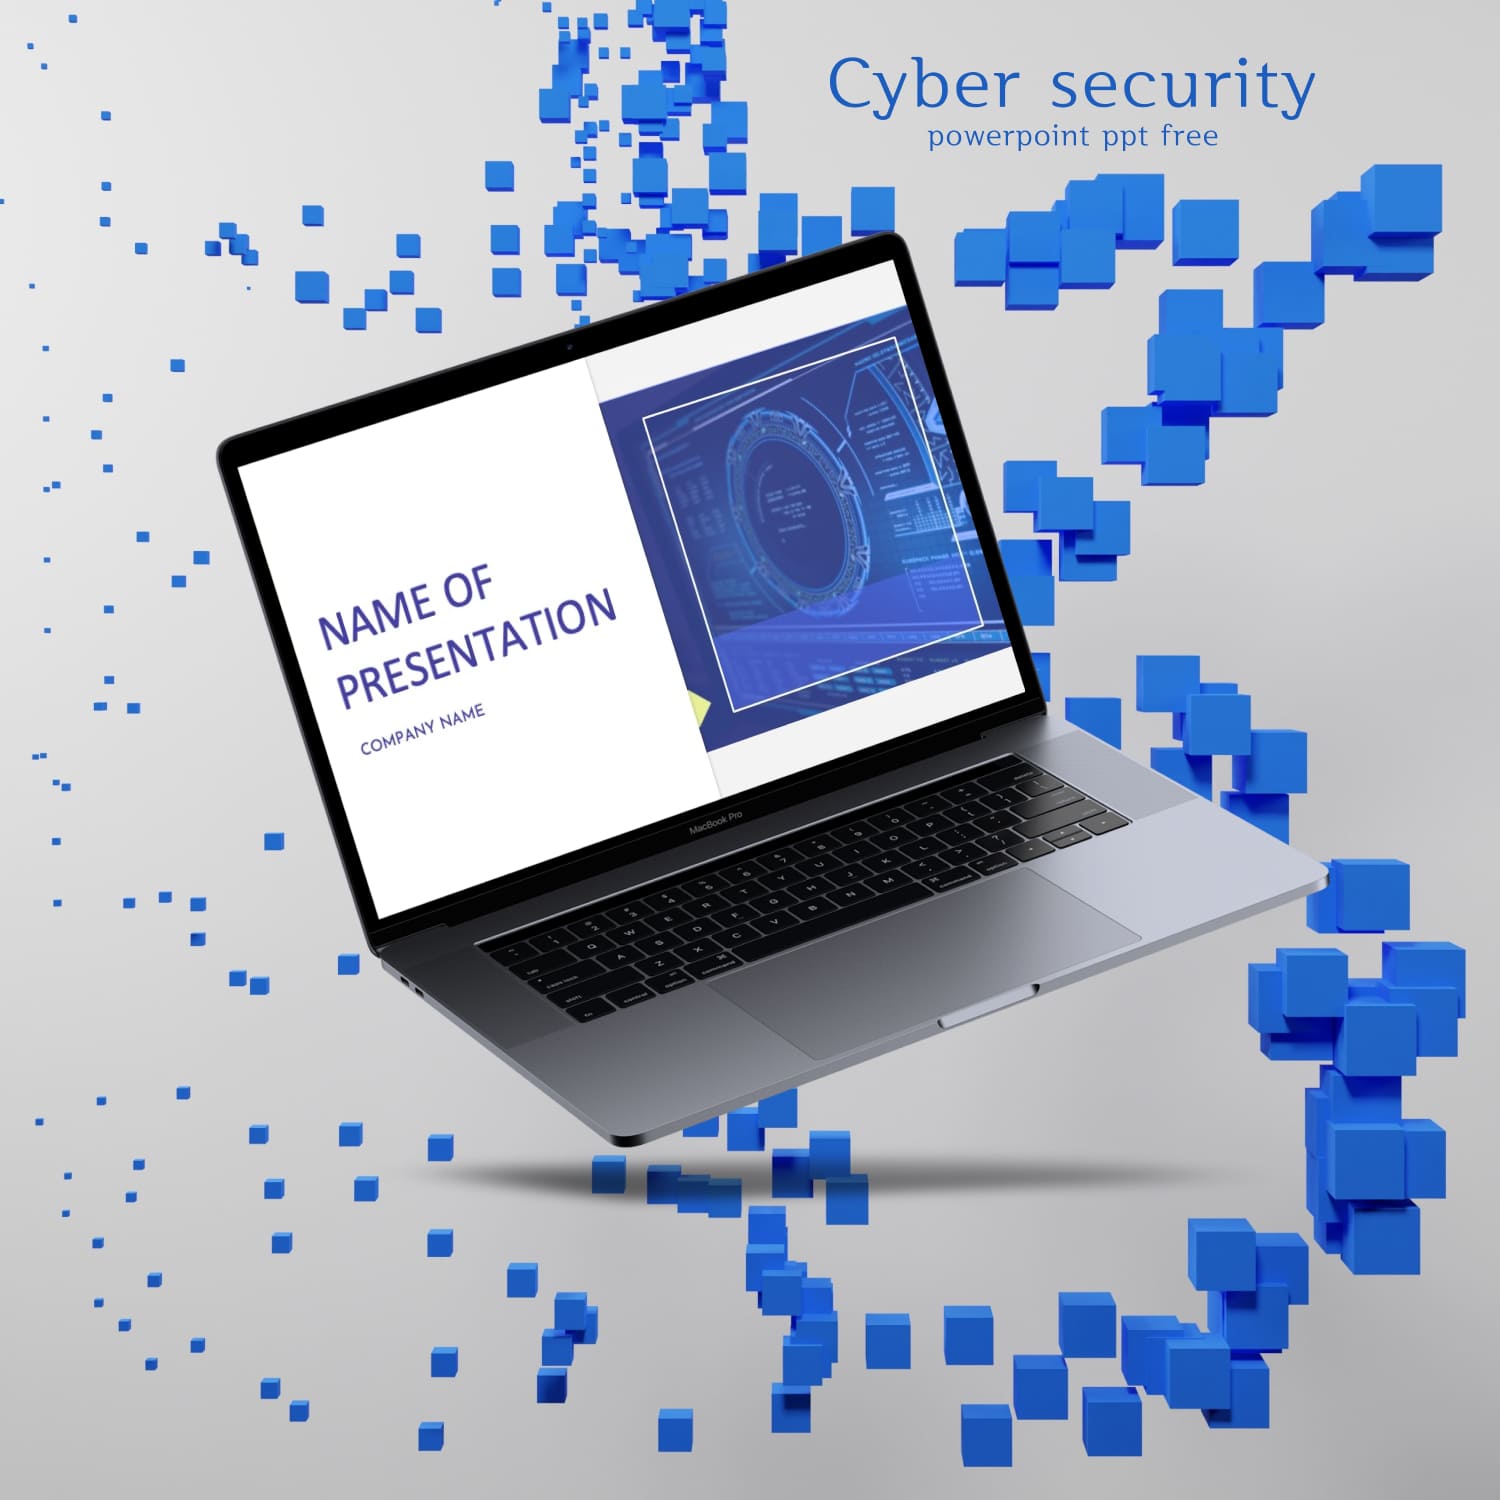 Cyber Security Powerpoint PPT Free 1500 1.